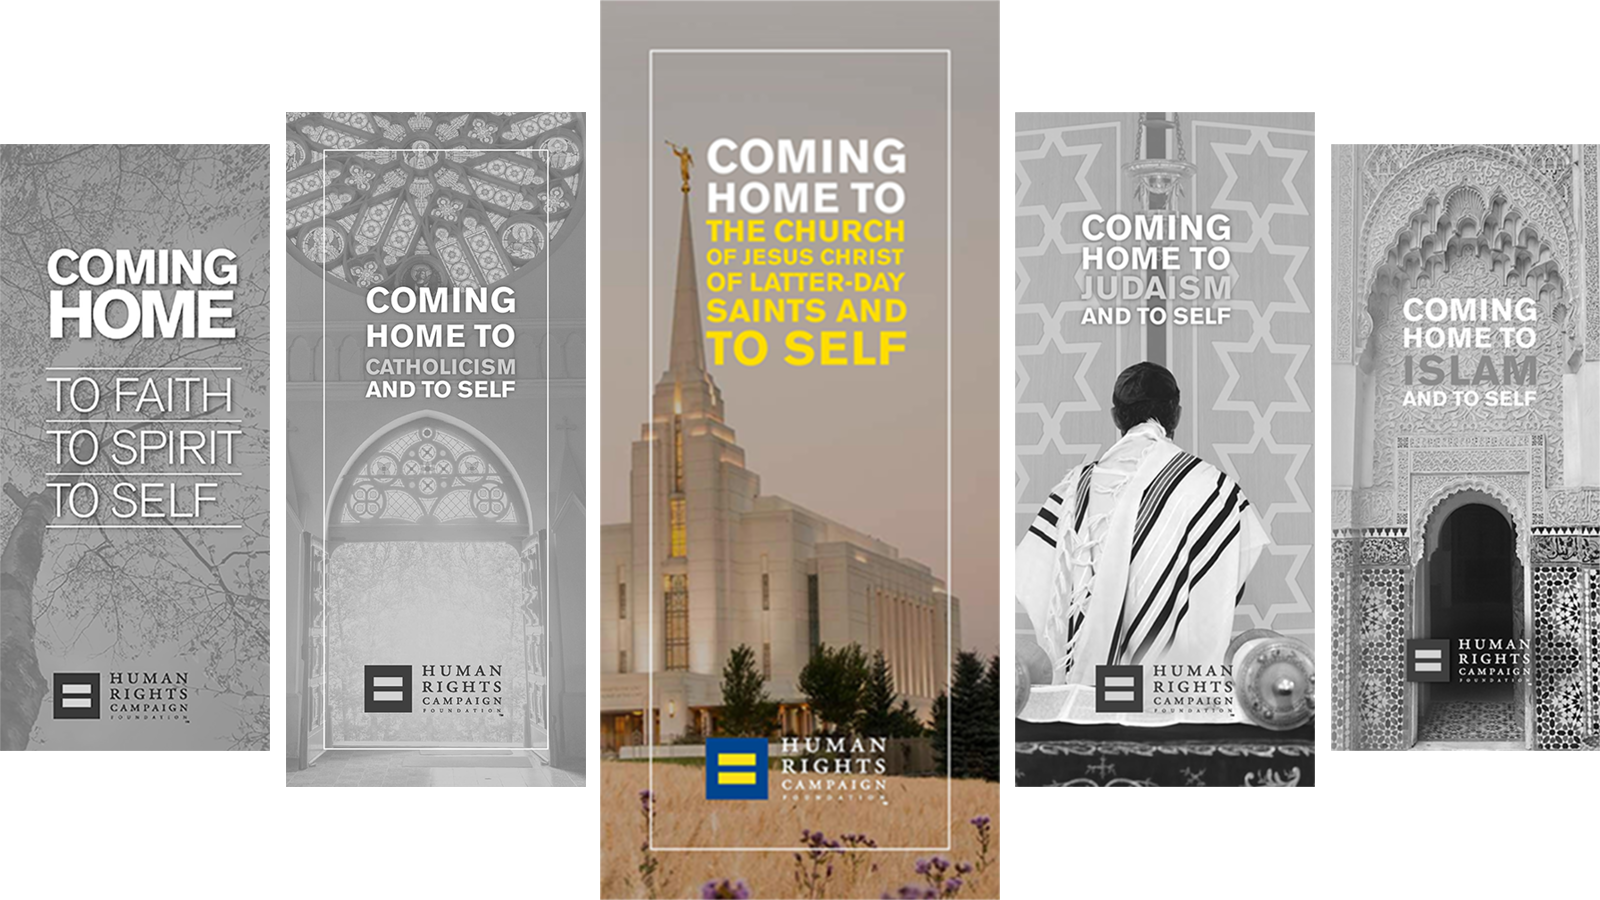 Hrc Releases New “coming Home” Faith Guide For Lgbtq Mormons Human Rights Campaign